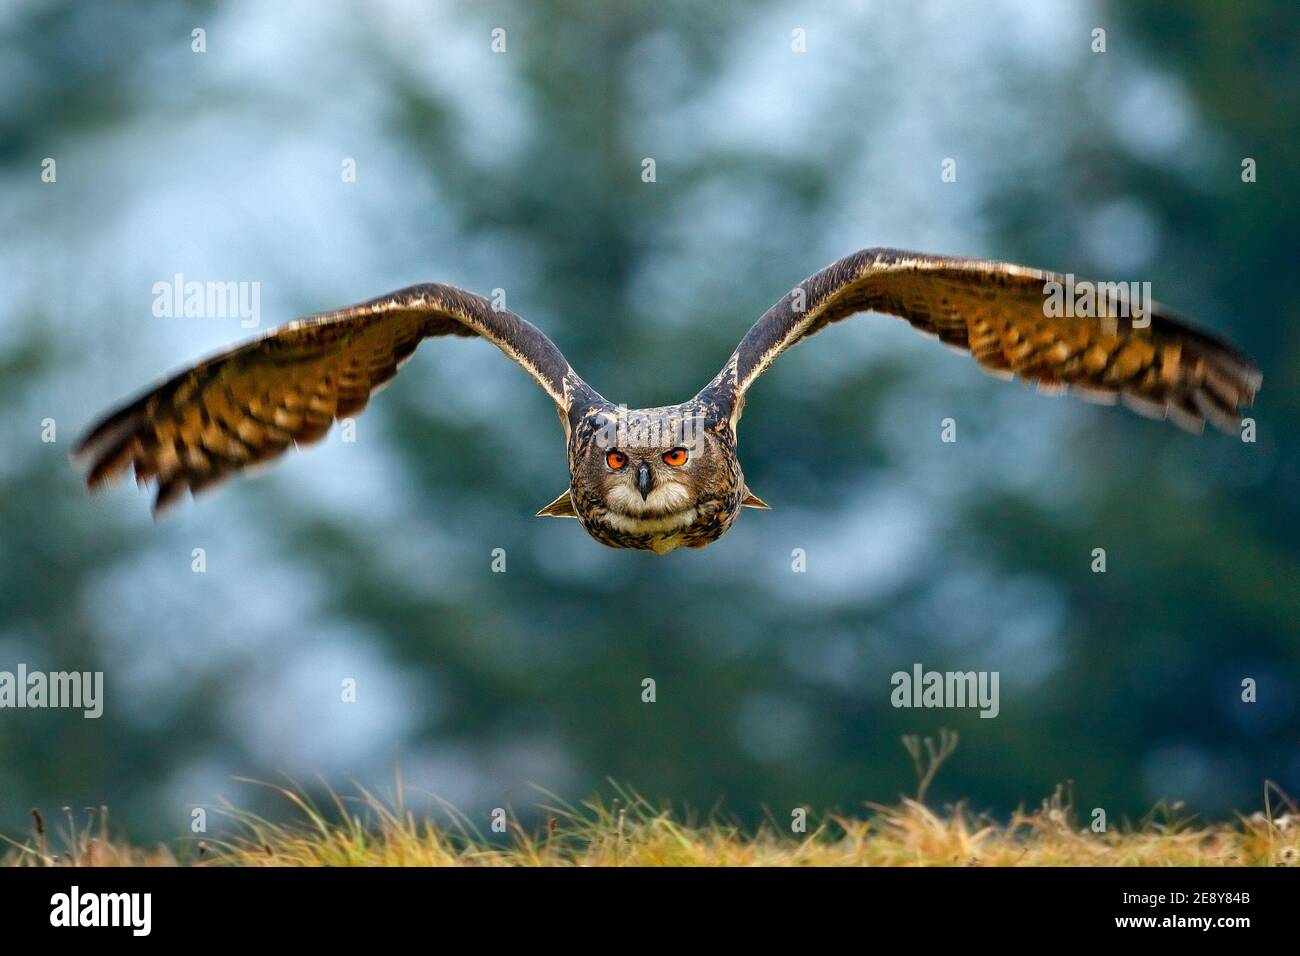 Eagle owl landing on snowy tree stump in forest. Flying Eagle owl with open wings in habitat with trees. Action winter scene from nature. Stock Photo